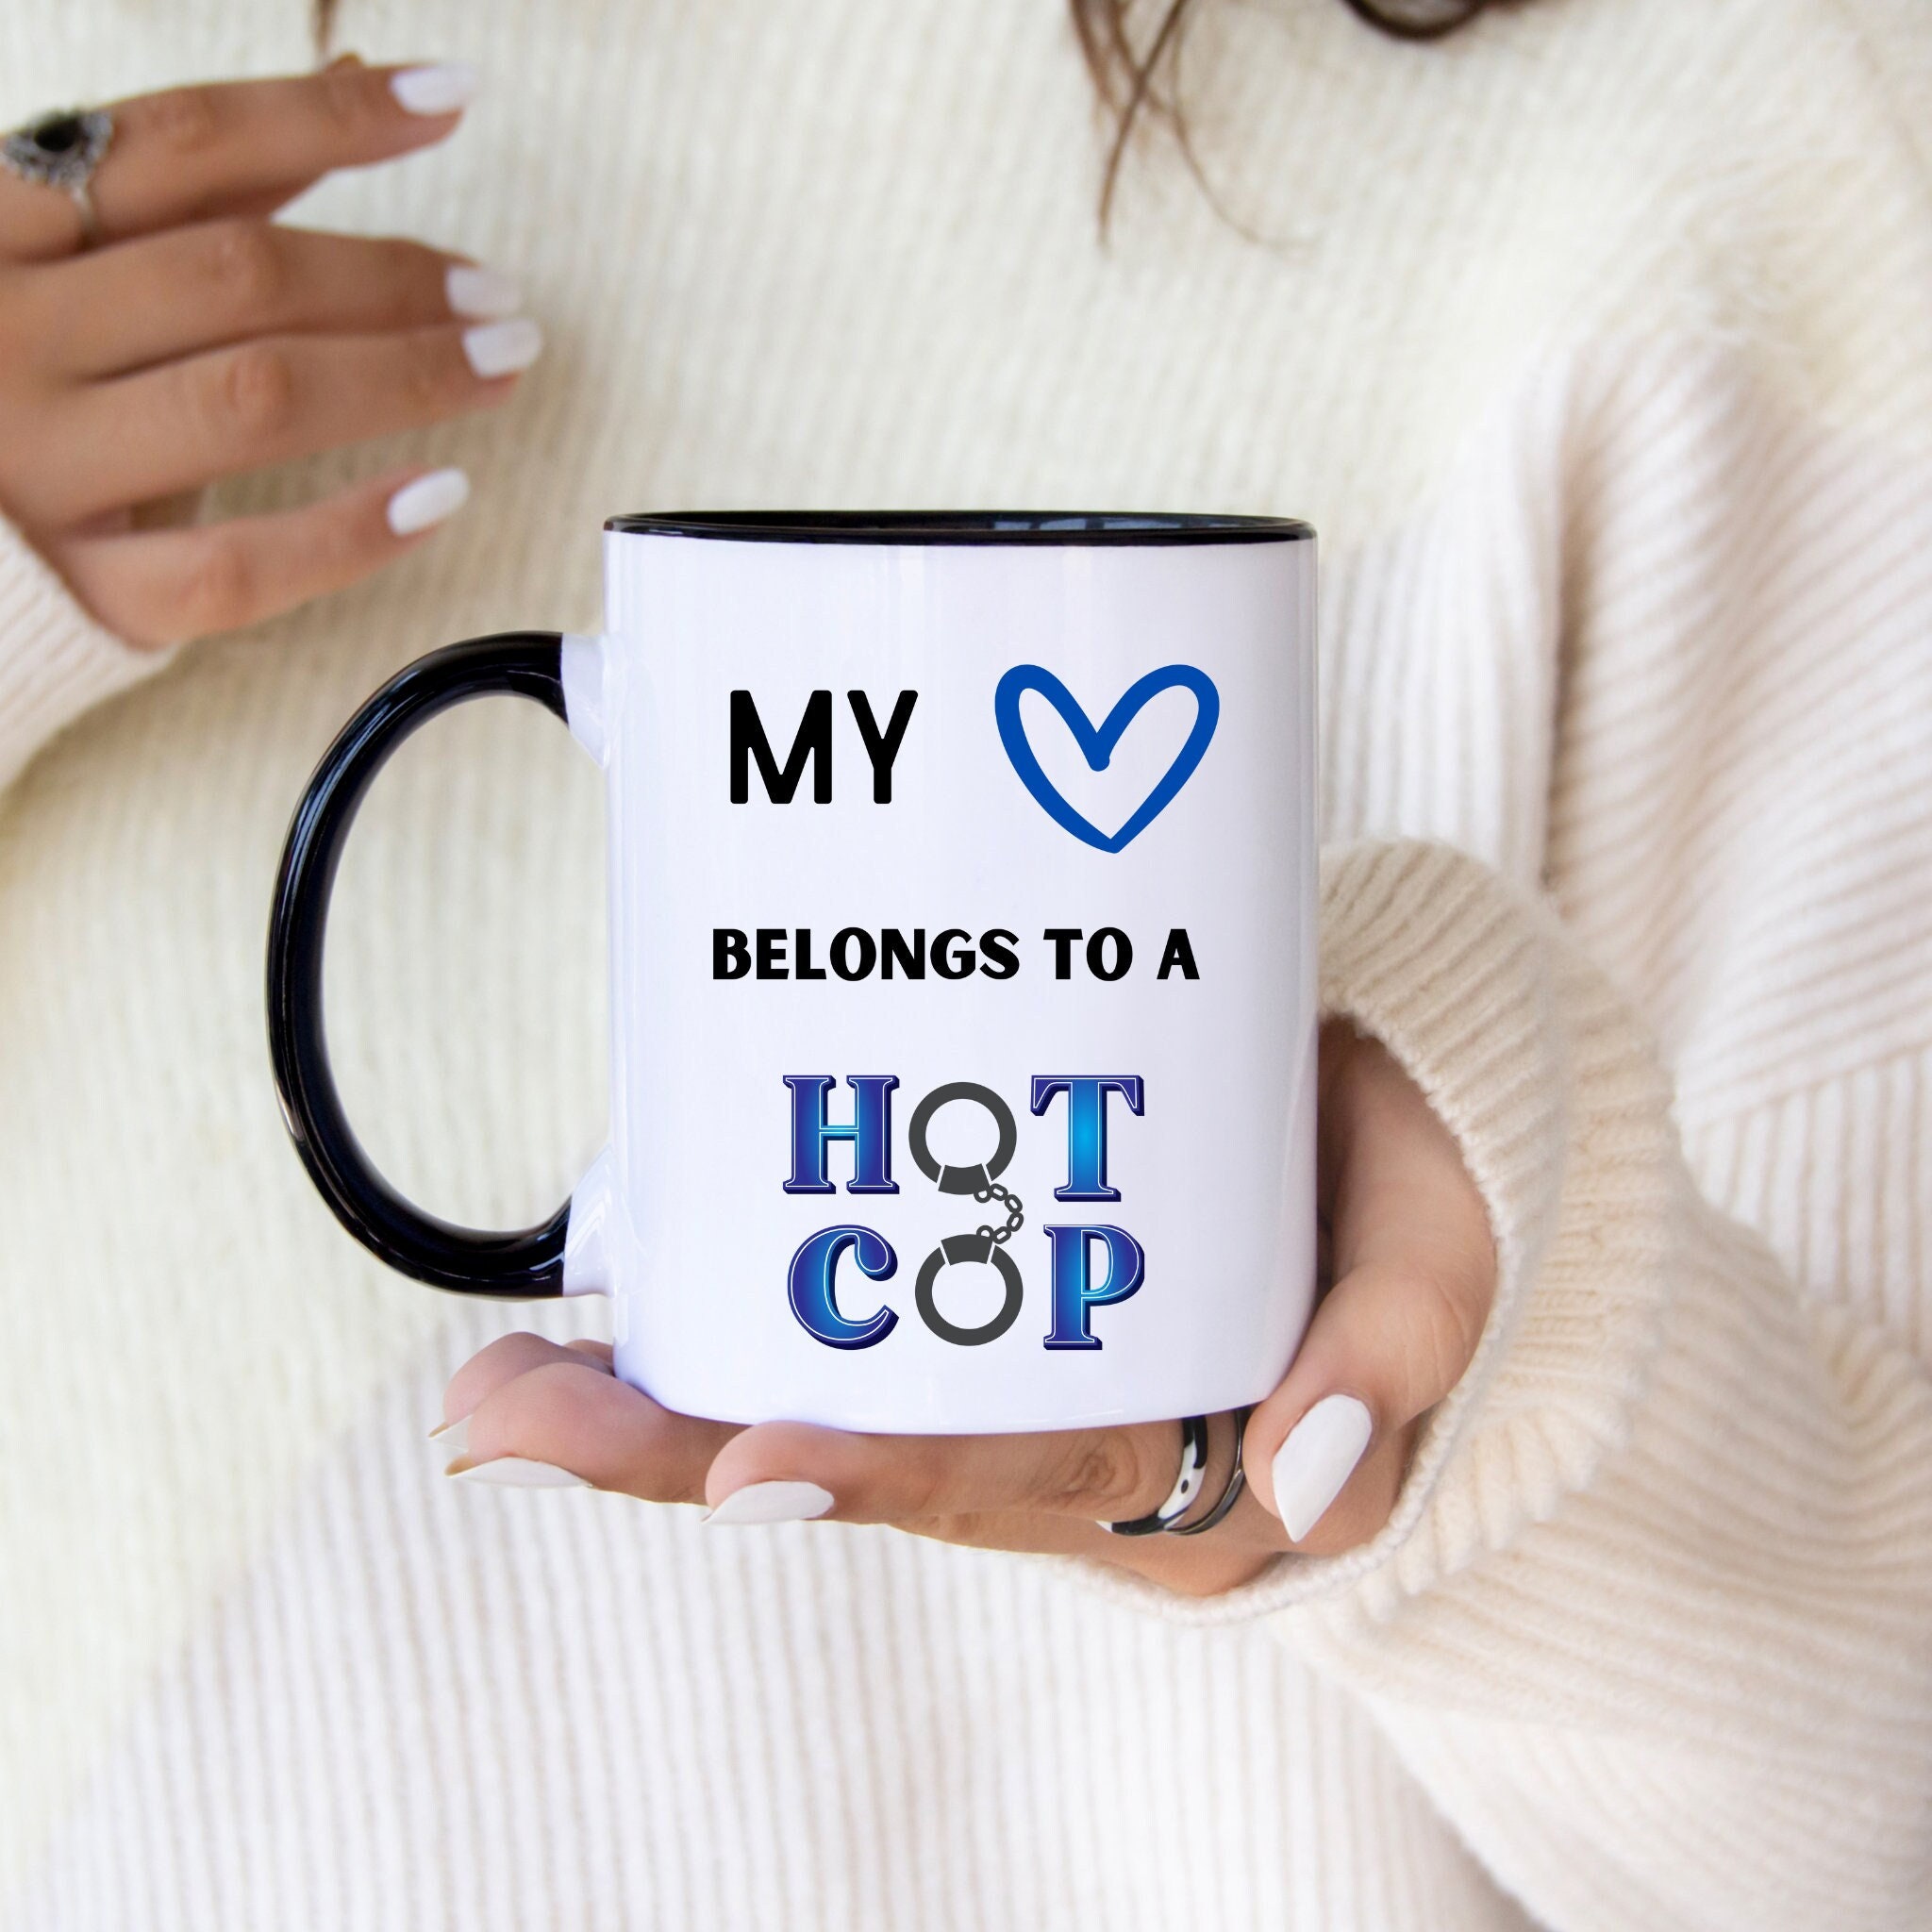 Cop mug, cop gifts, gift for cop